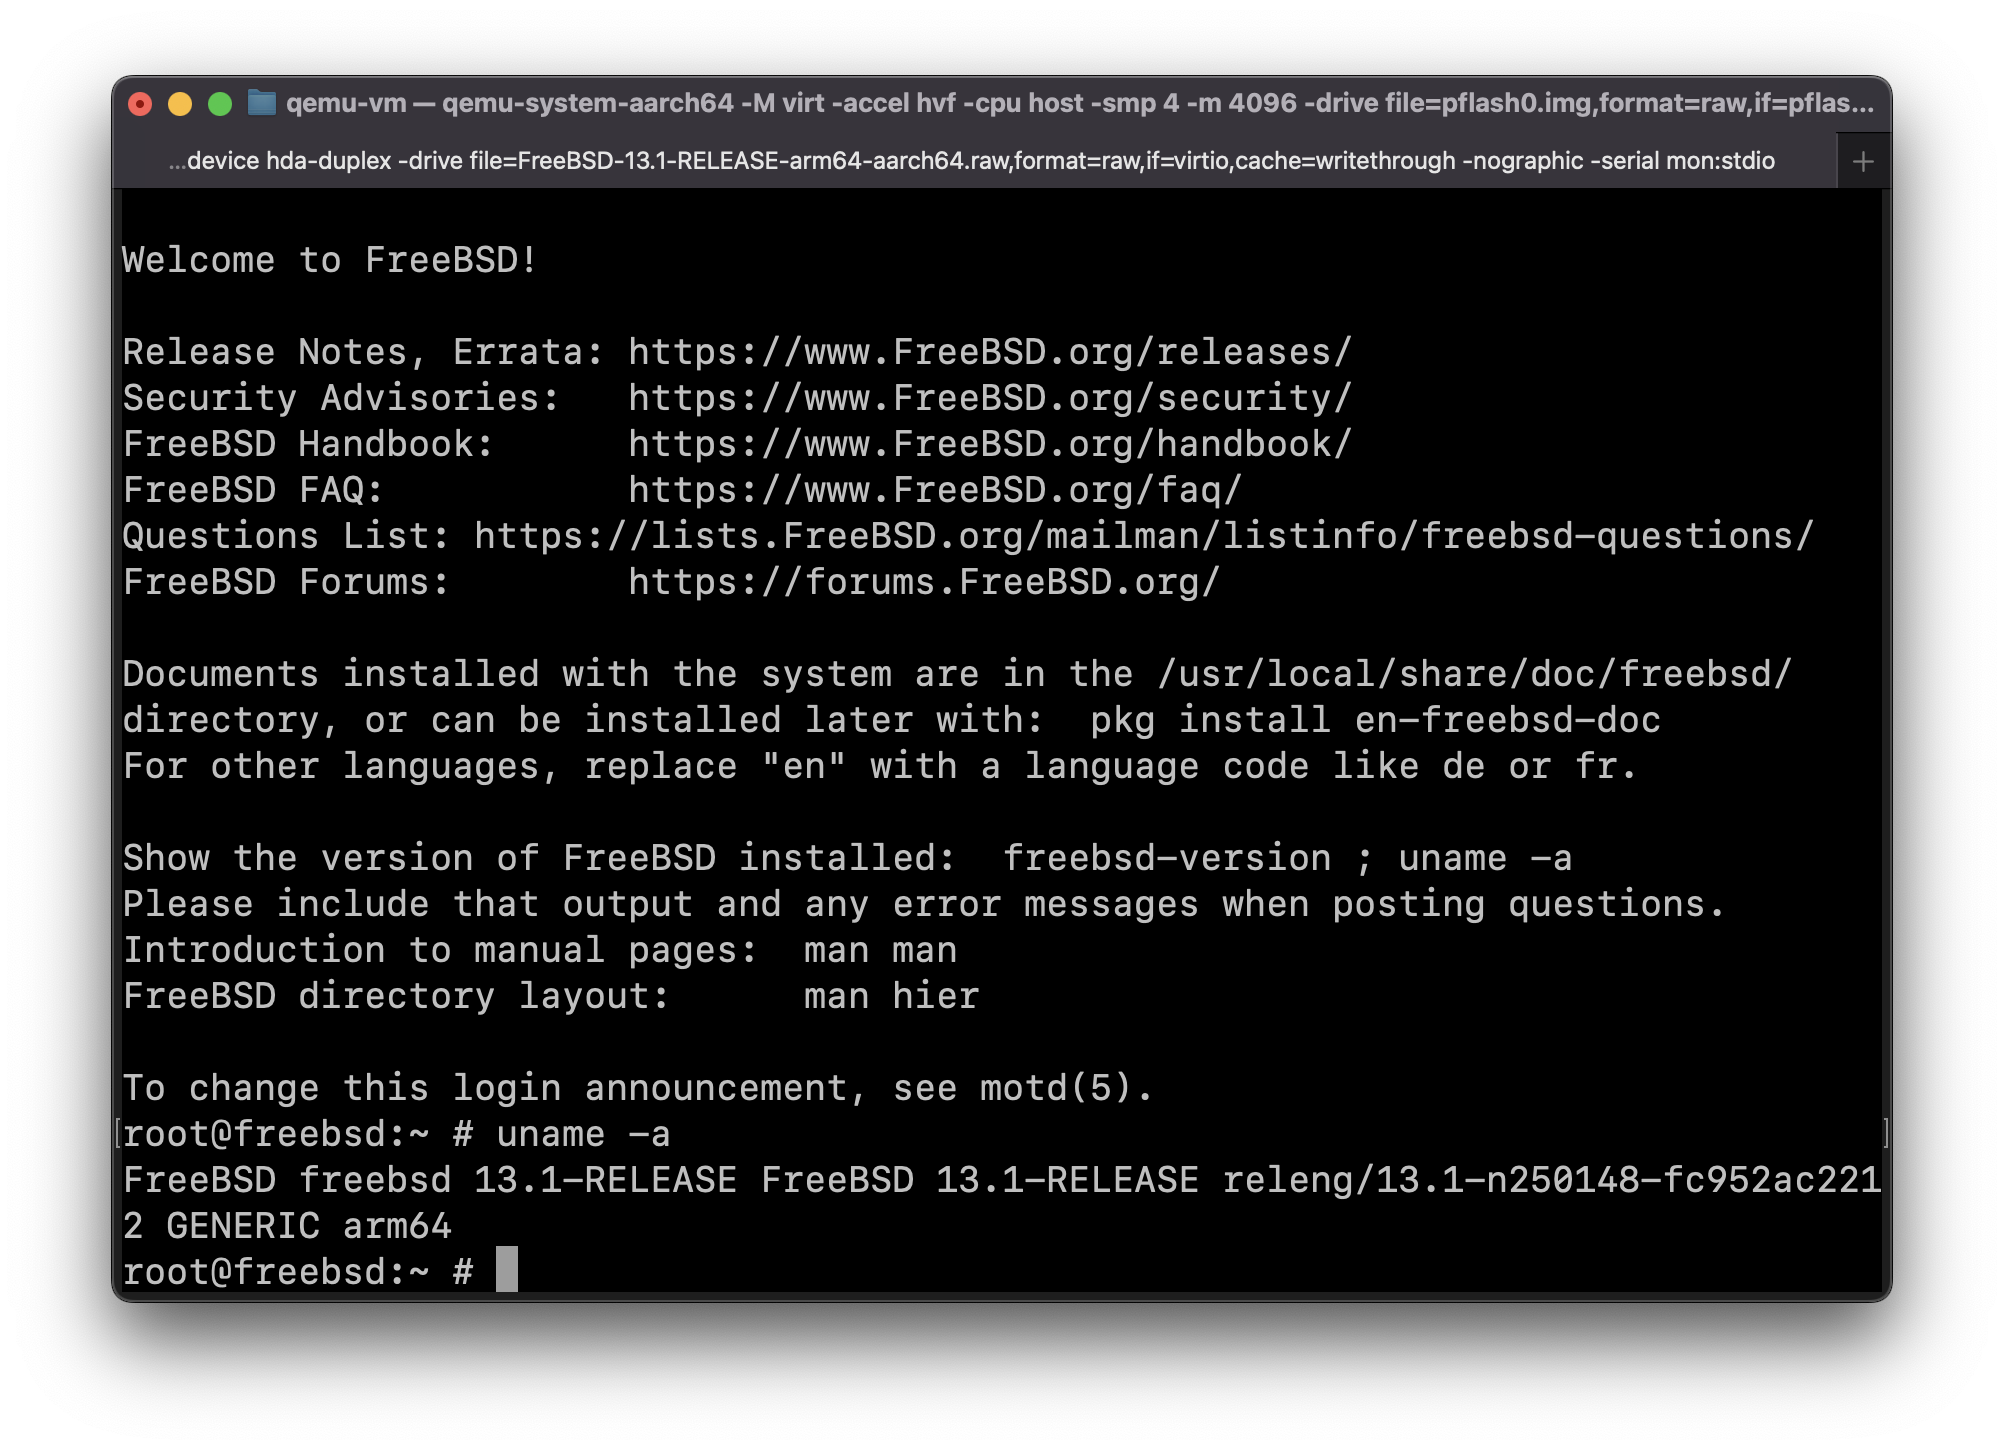 A screenshot of FreeBSD 13.1-RELEASE for ARM64 console in QEMU on Apple Silicon Mac, showing the output of uname -a